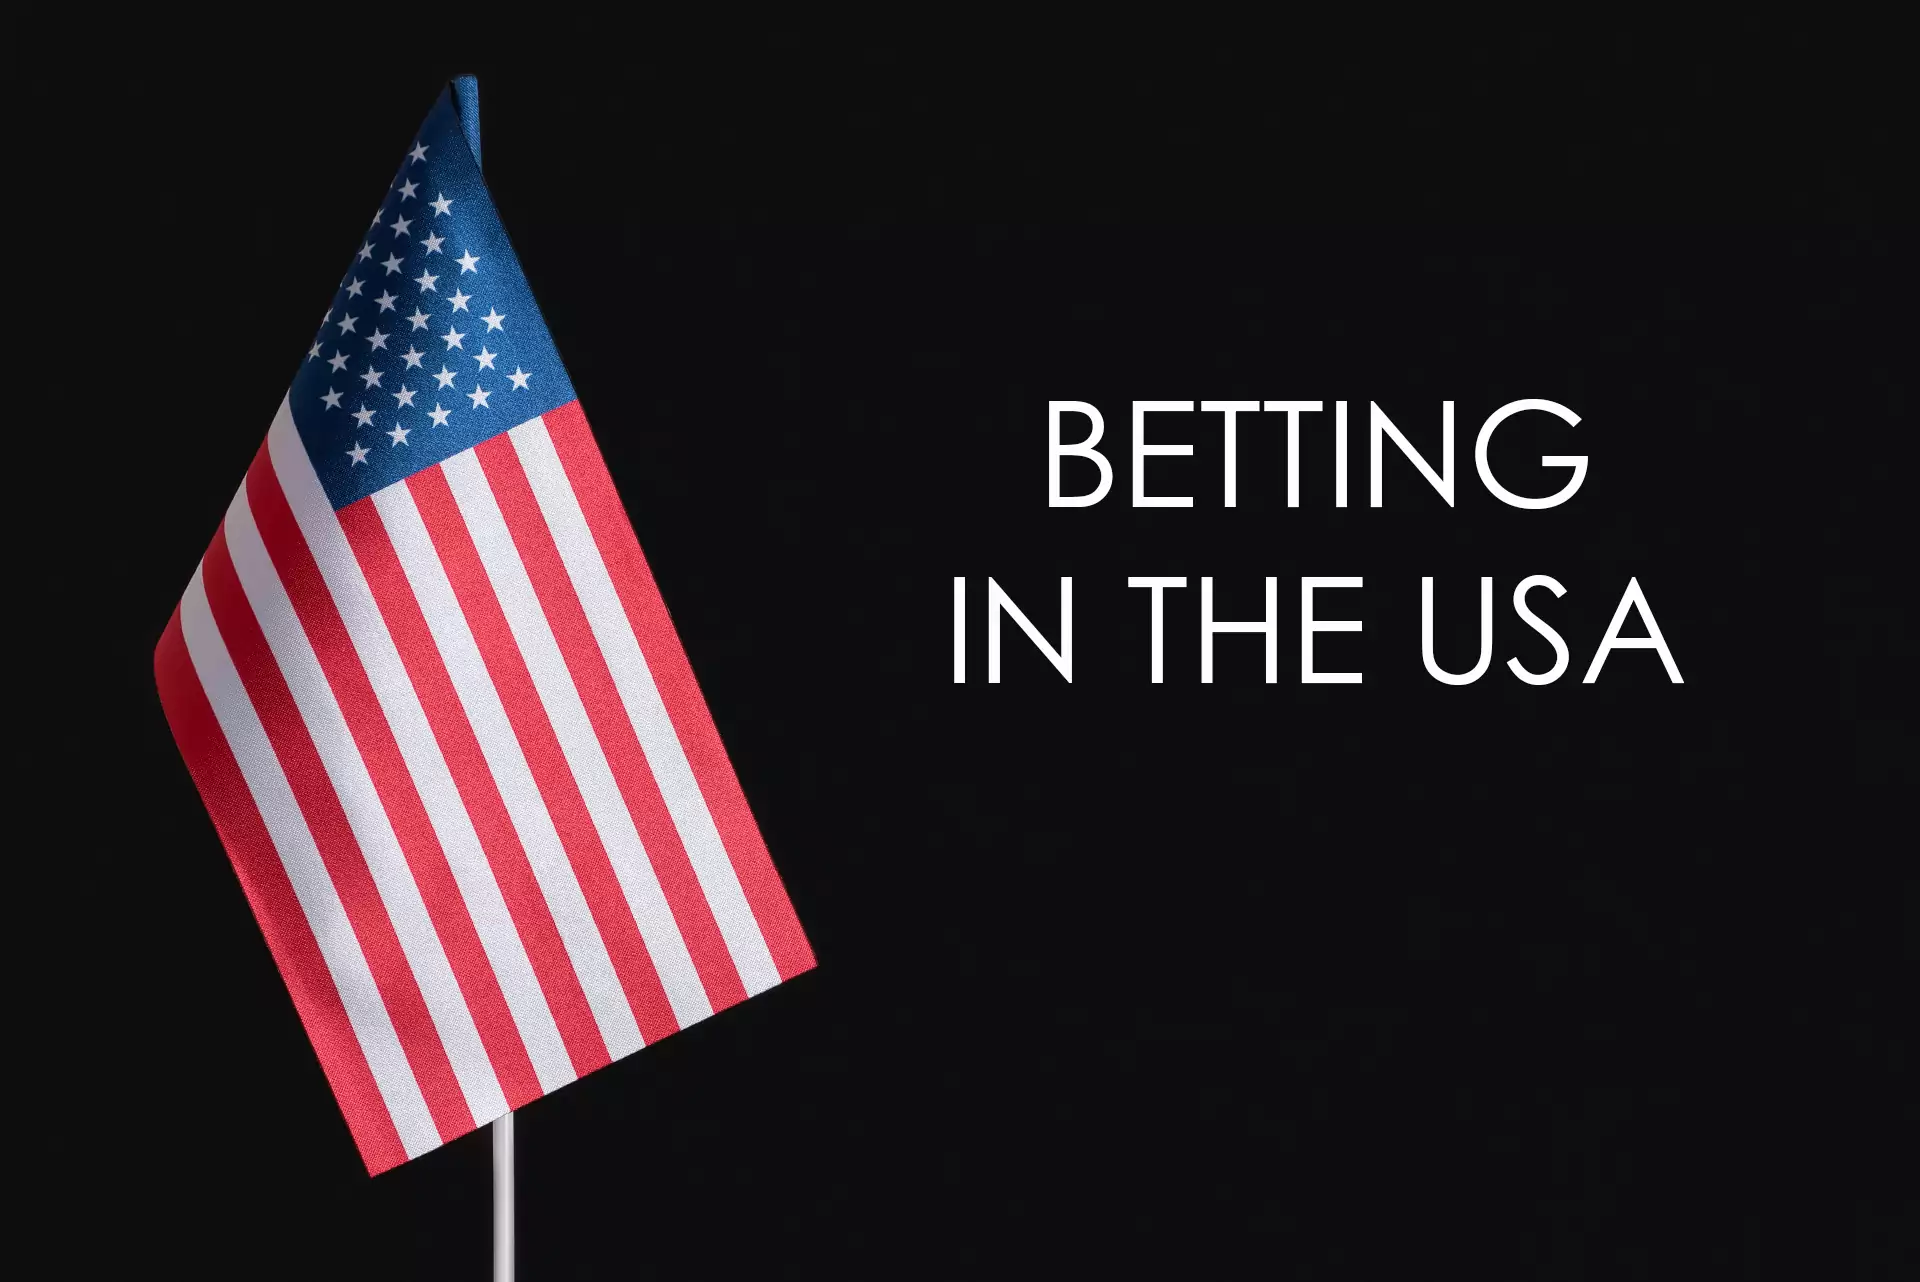 Sports betting is legalized in the majority of States.